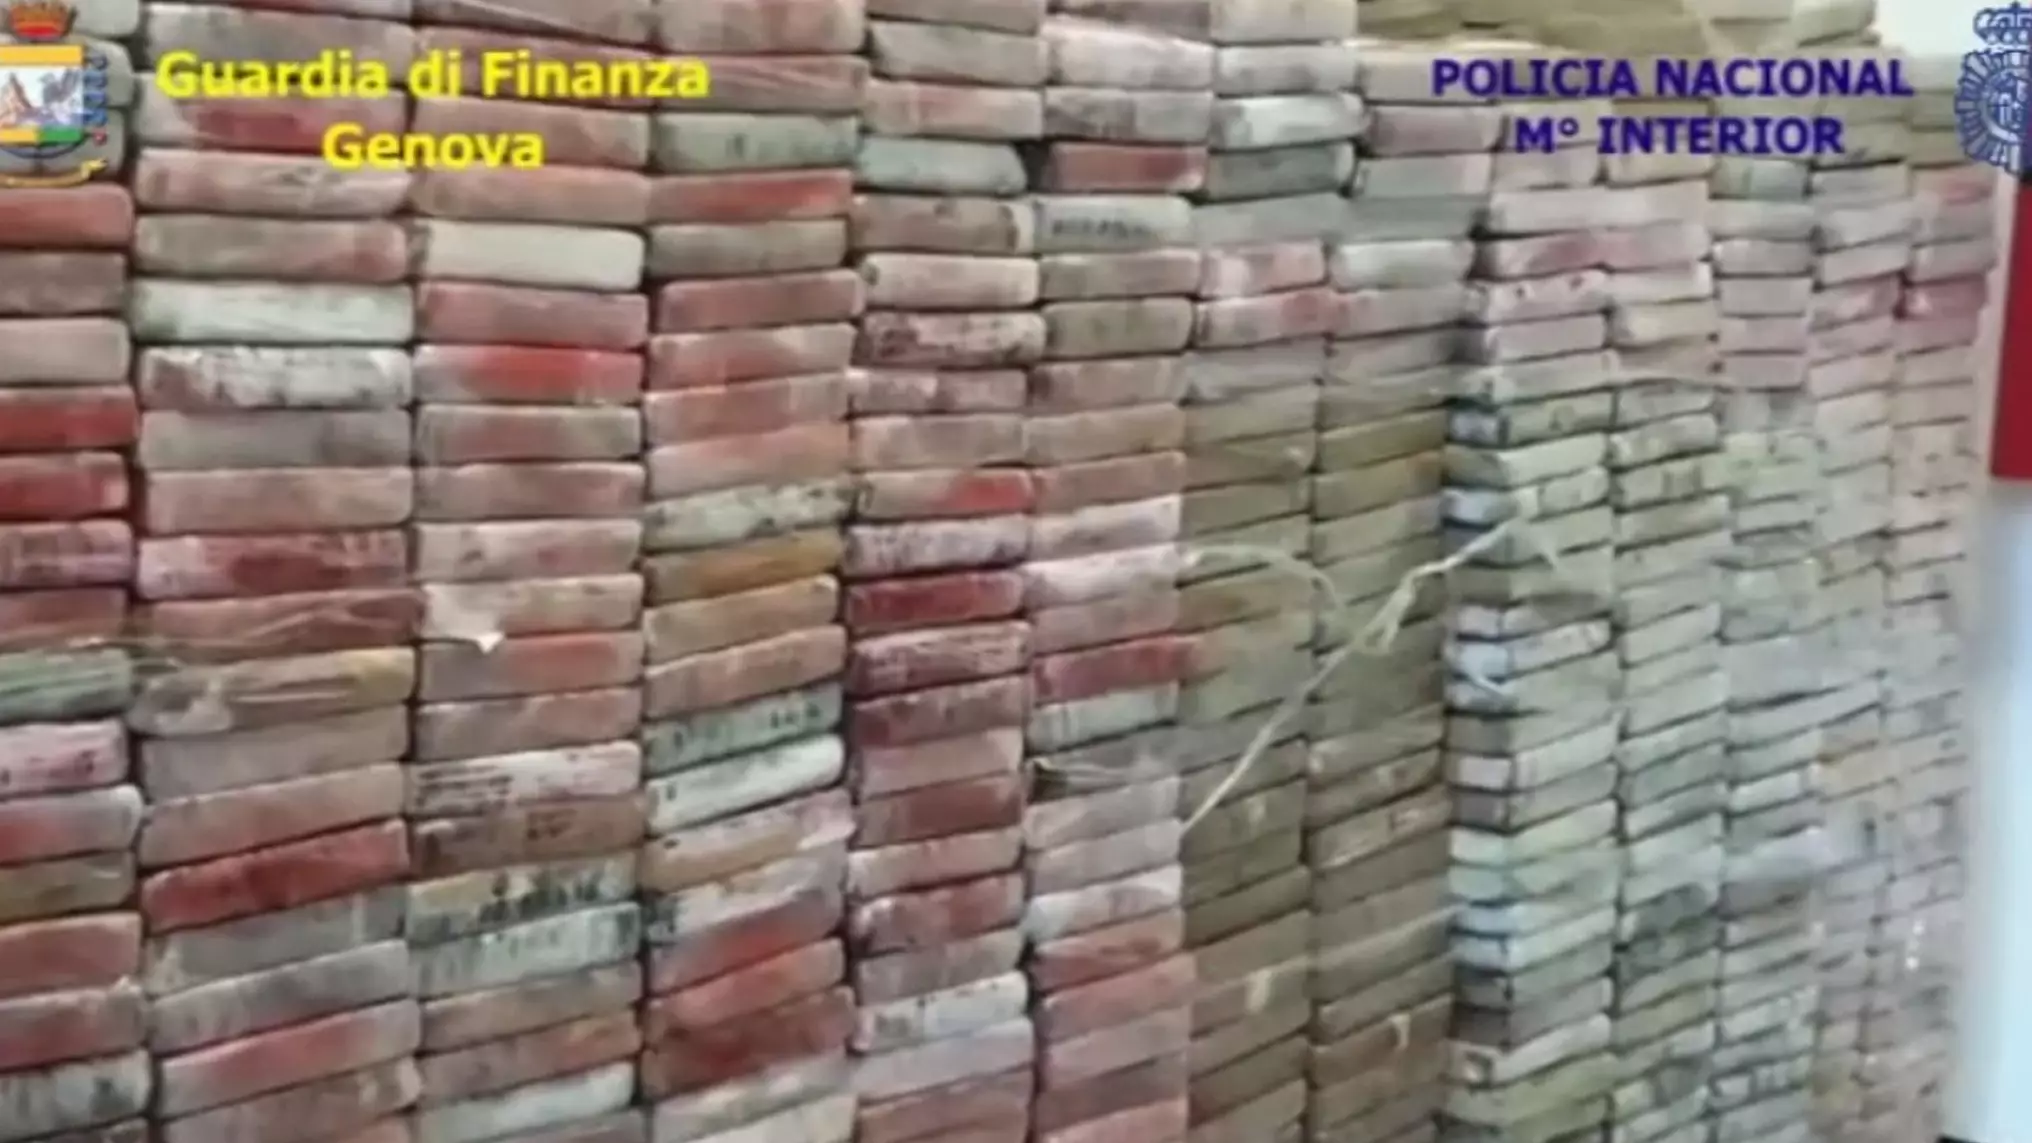 Italian Police Seize The Country’s Largest Shipment Of Cocaine In 25 Years